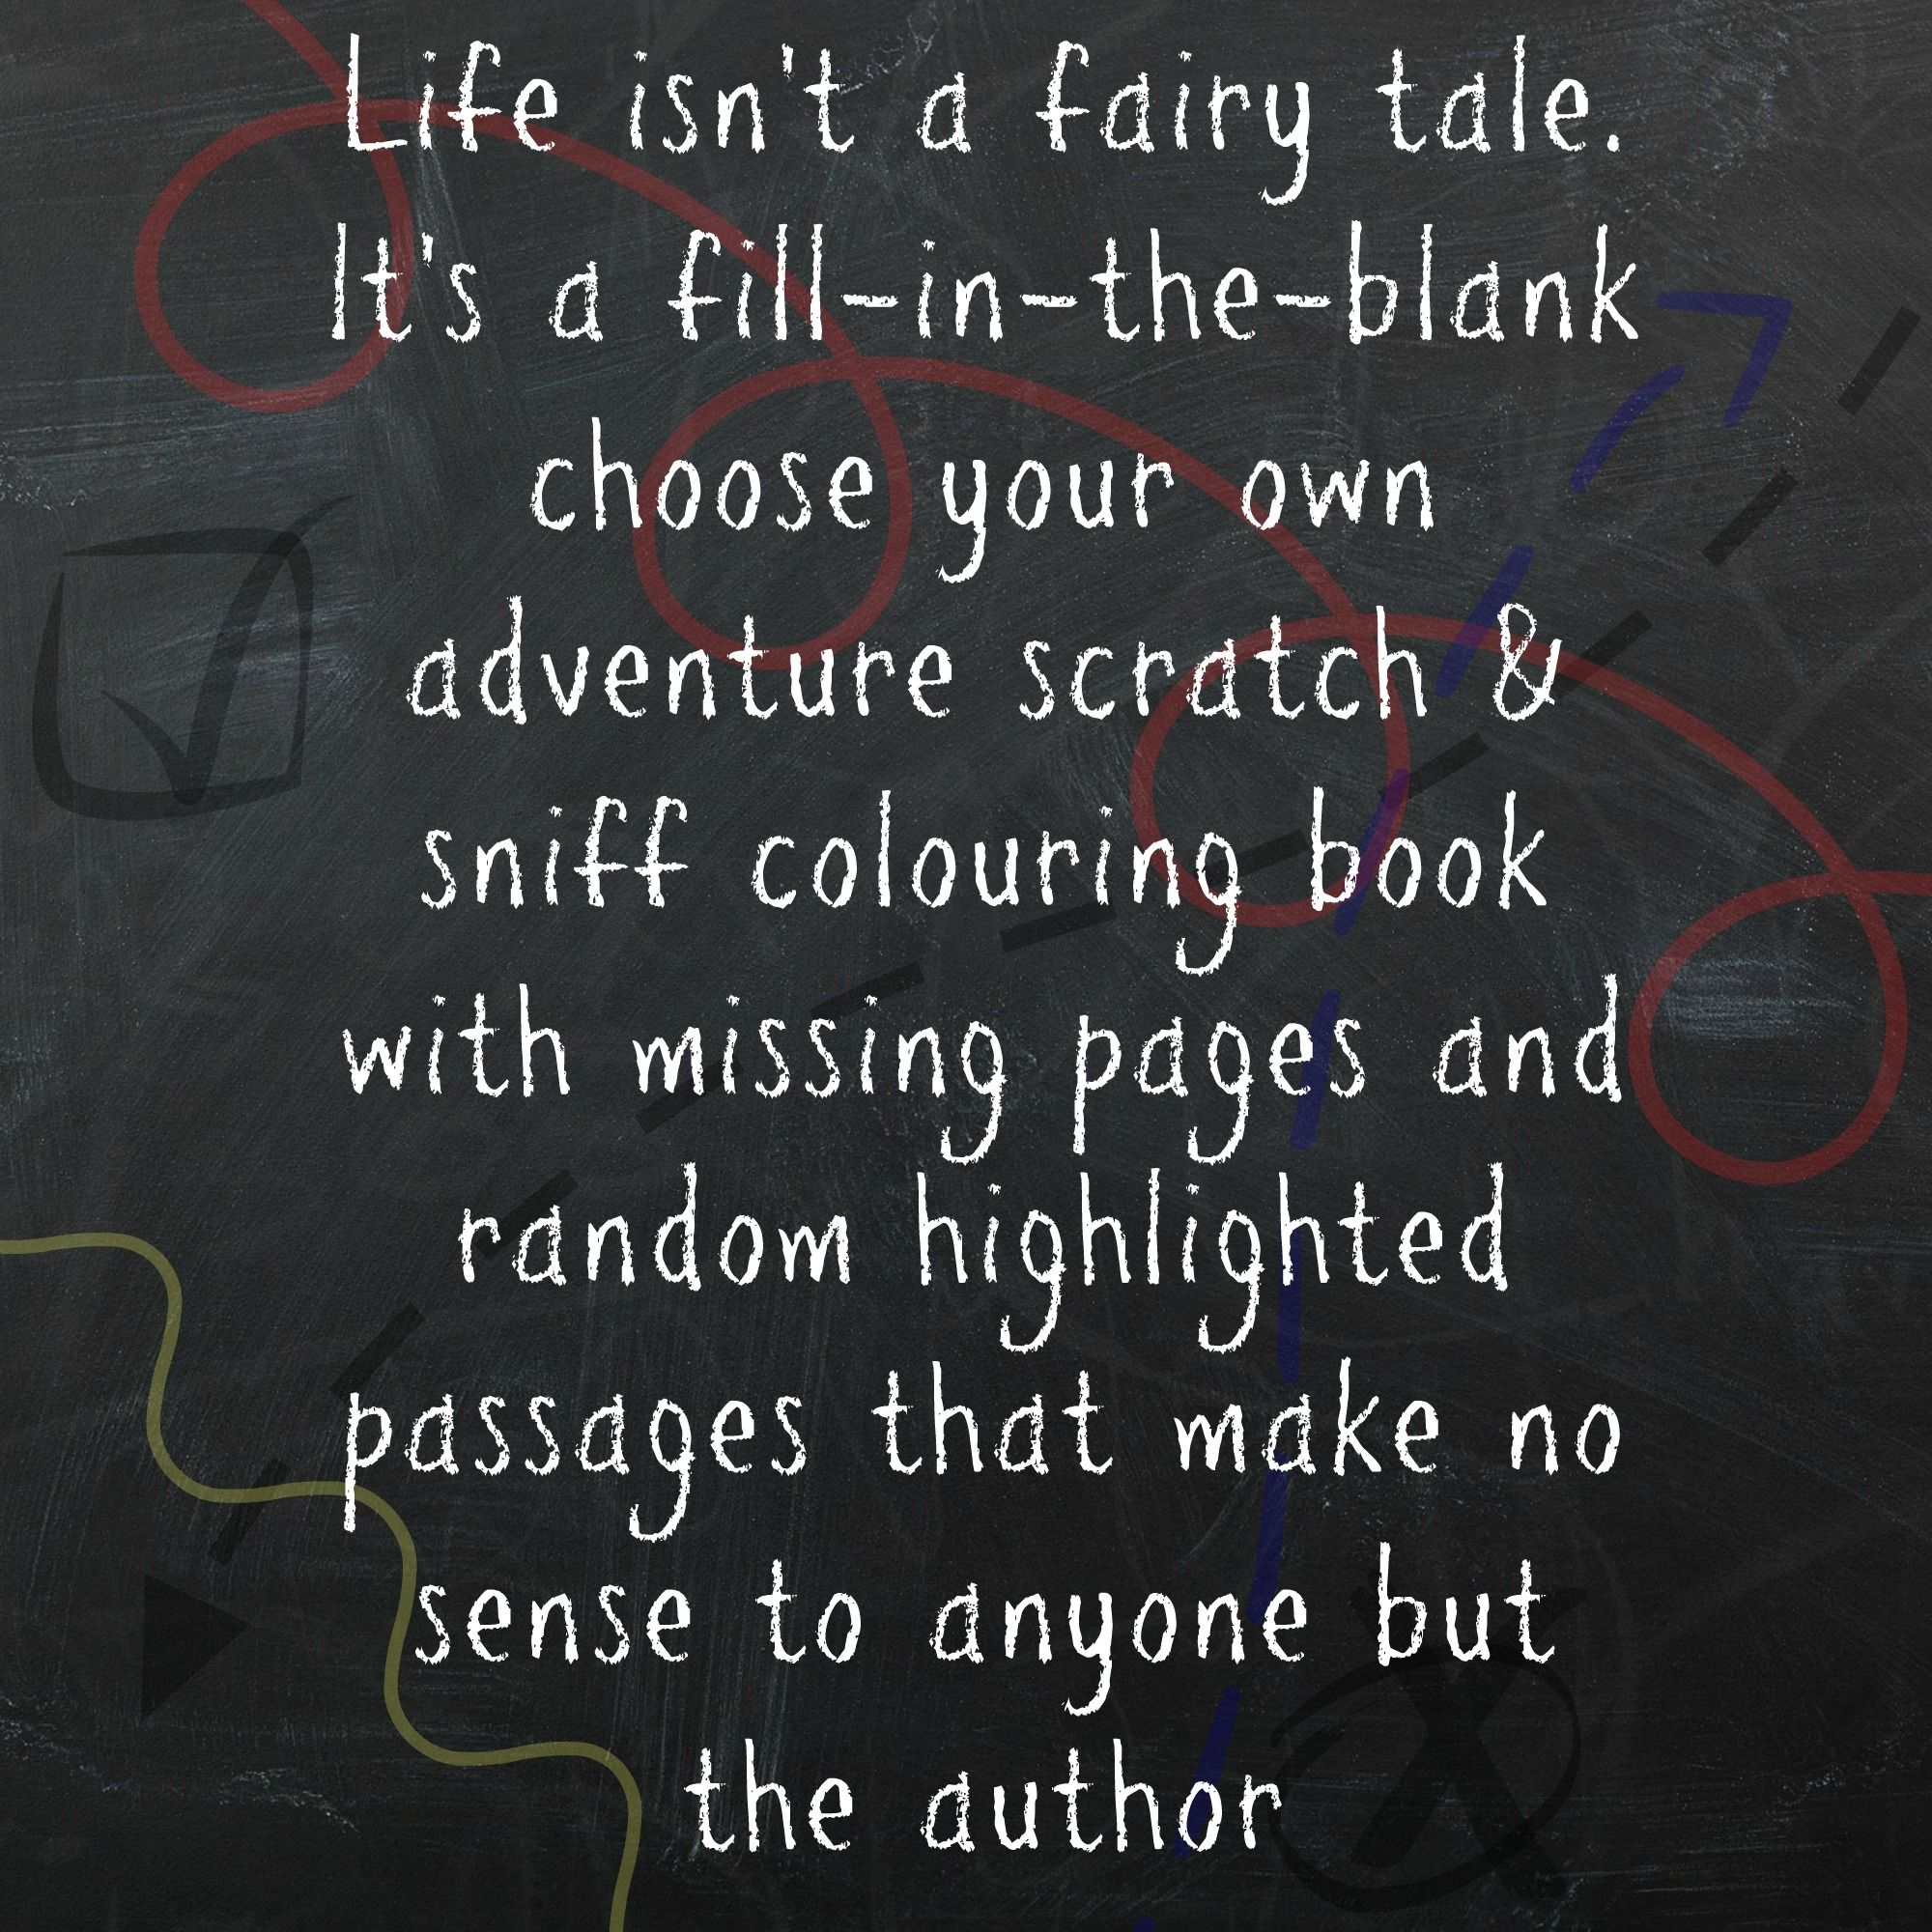 life isn’t a fairy tale. it’s a fill in the blank choose your own adventure scratch & sniff coloring book with missing pages and random highlighted passages that make no sense to anyone but the author